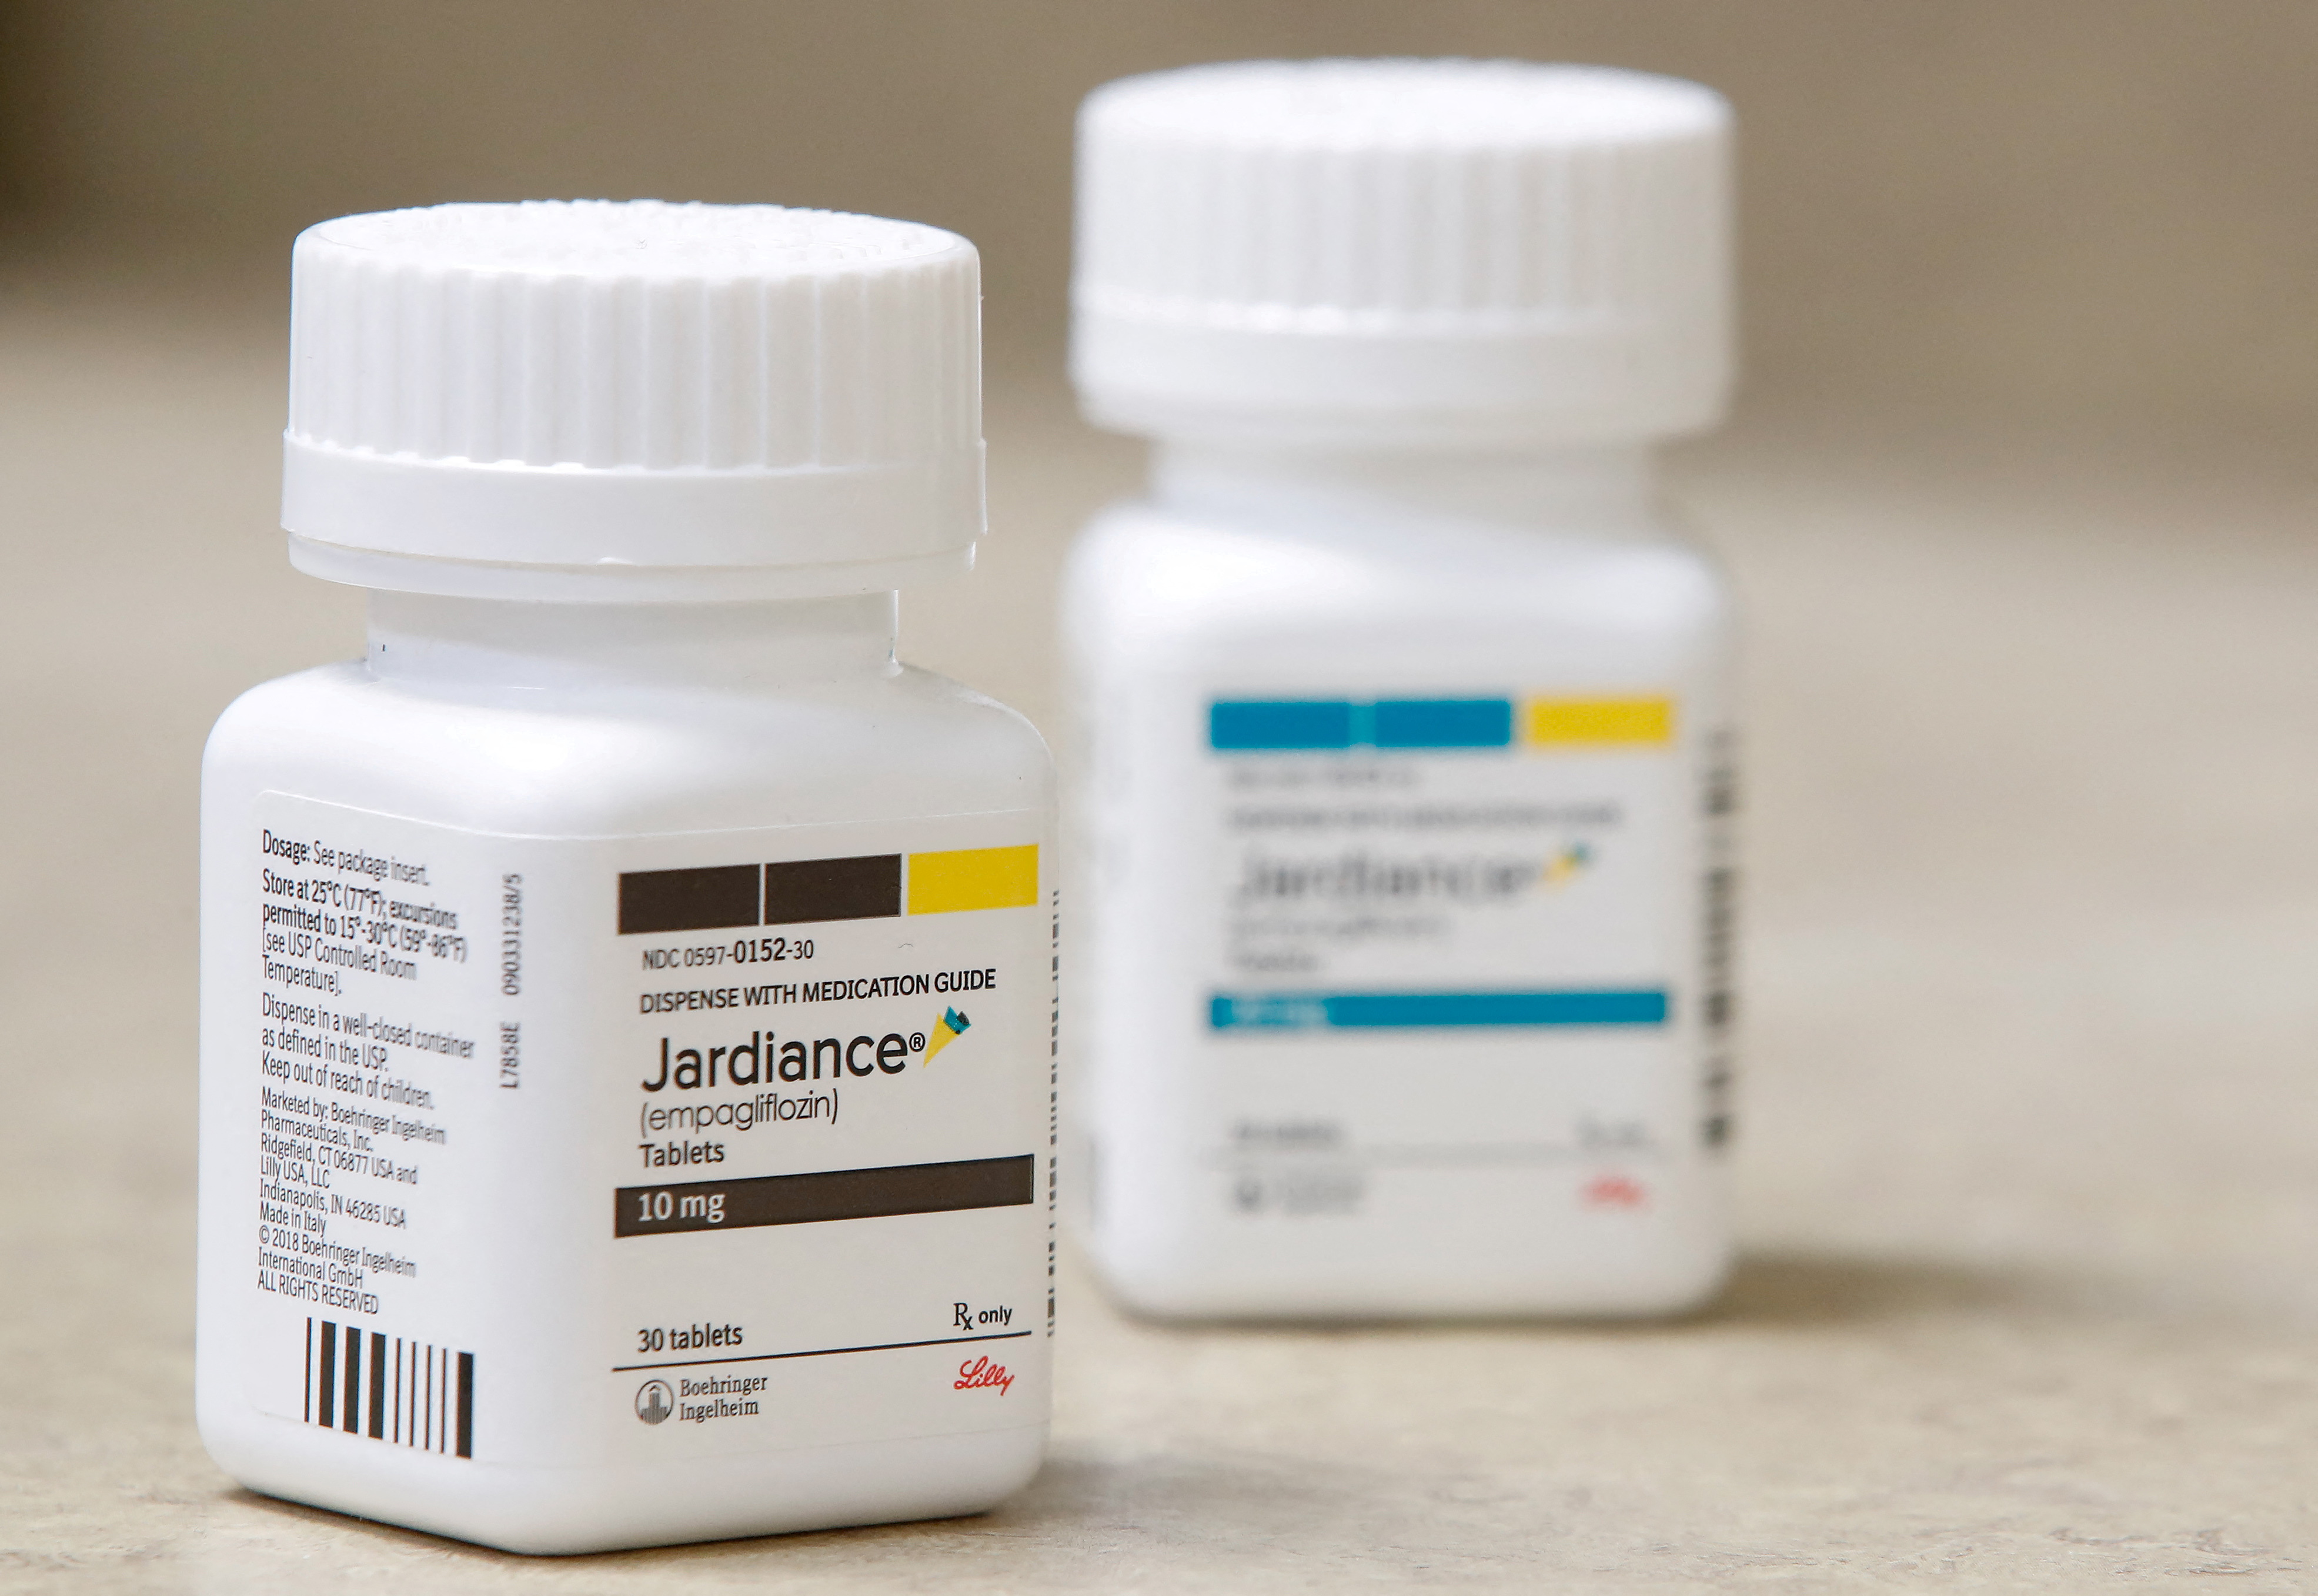 Bottles of the drug Jardiance, made by Eli Lilly and Company, sit on a counter at a pharmacy in Provo